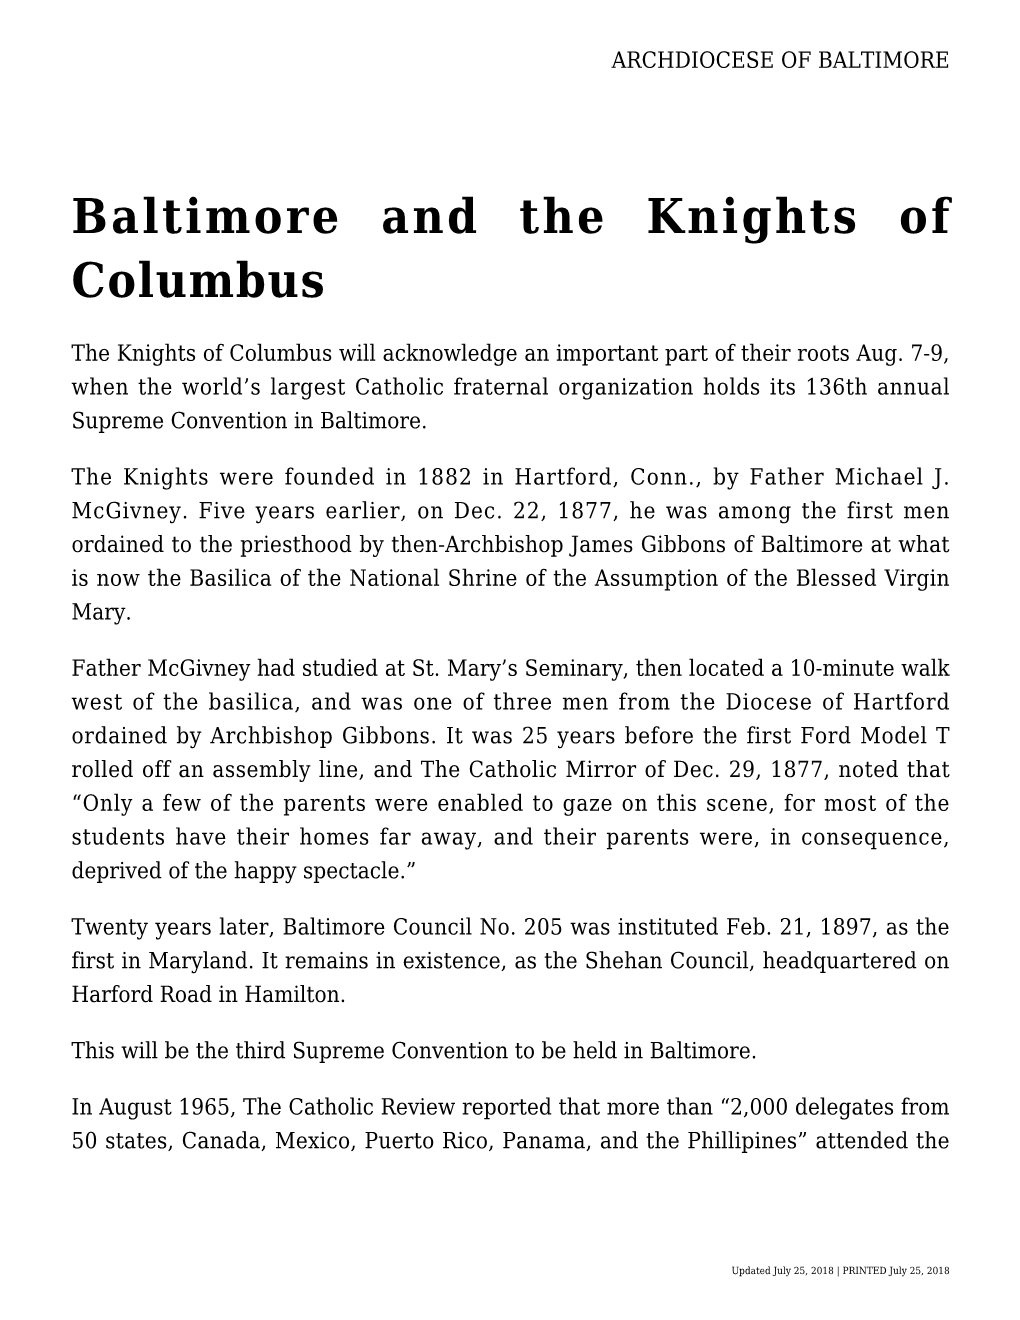 Baltimore and the Knights of Columbus